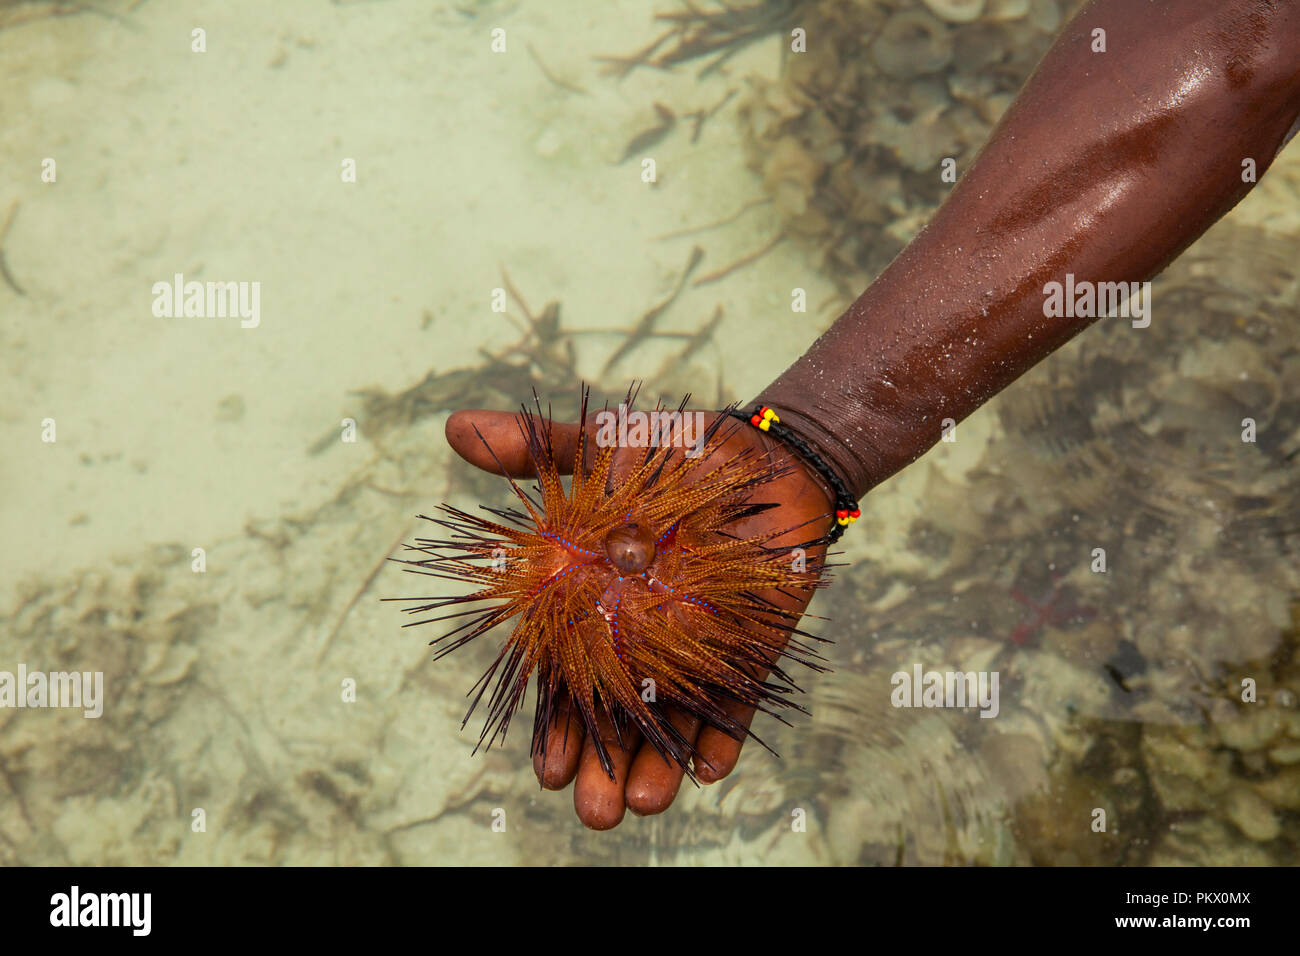 Red sea urchin (Astropyga radiata), common names of these urchins include "radial urchins" and "fire urchins." Galu beach, Kenya Stock Photo